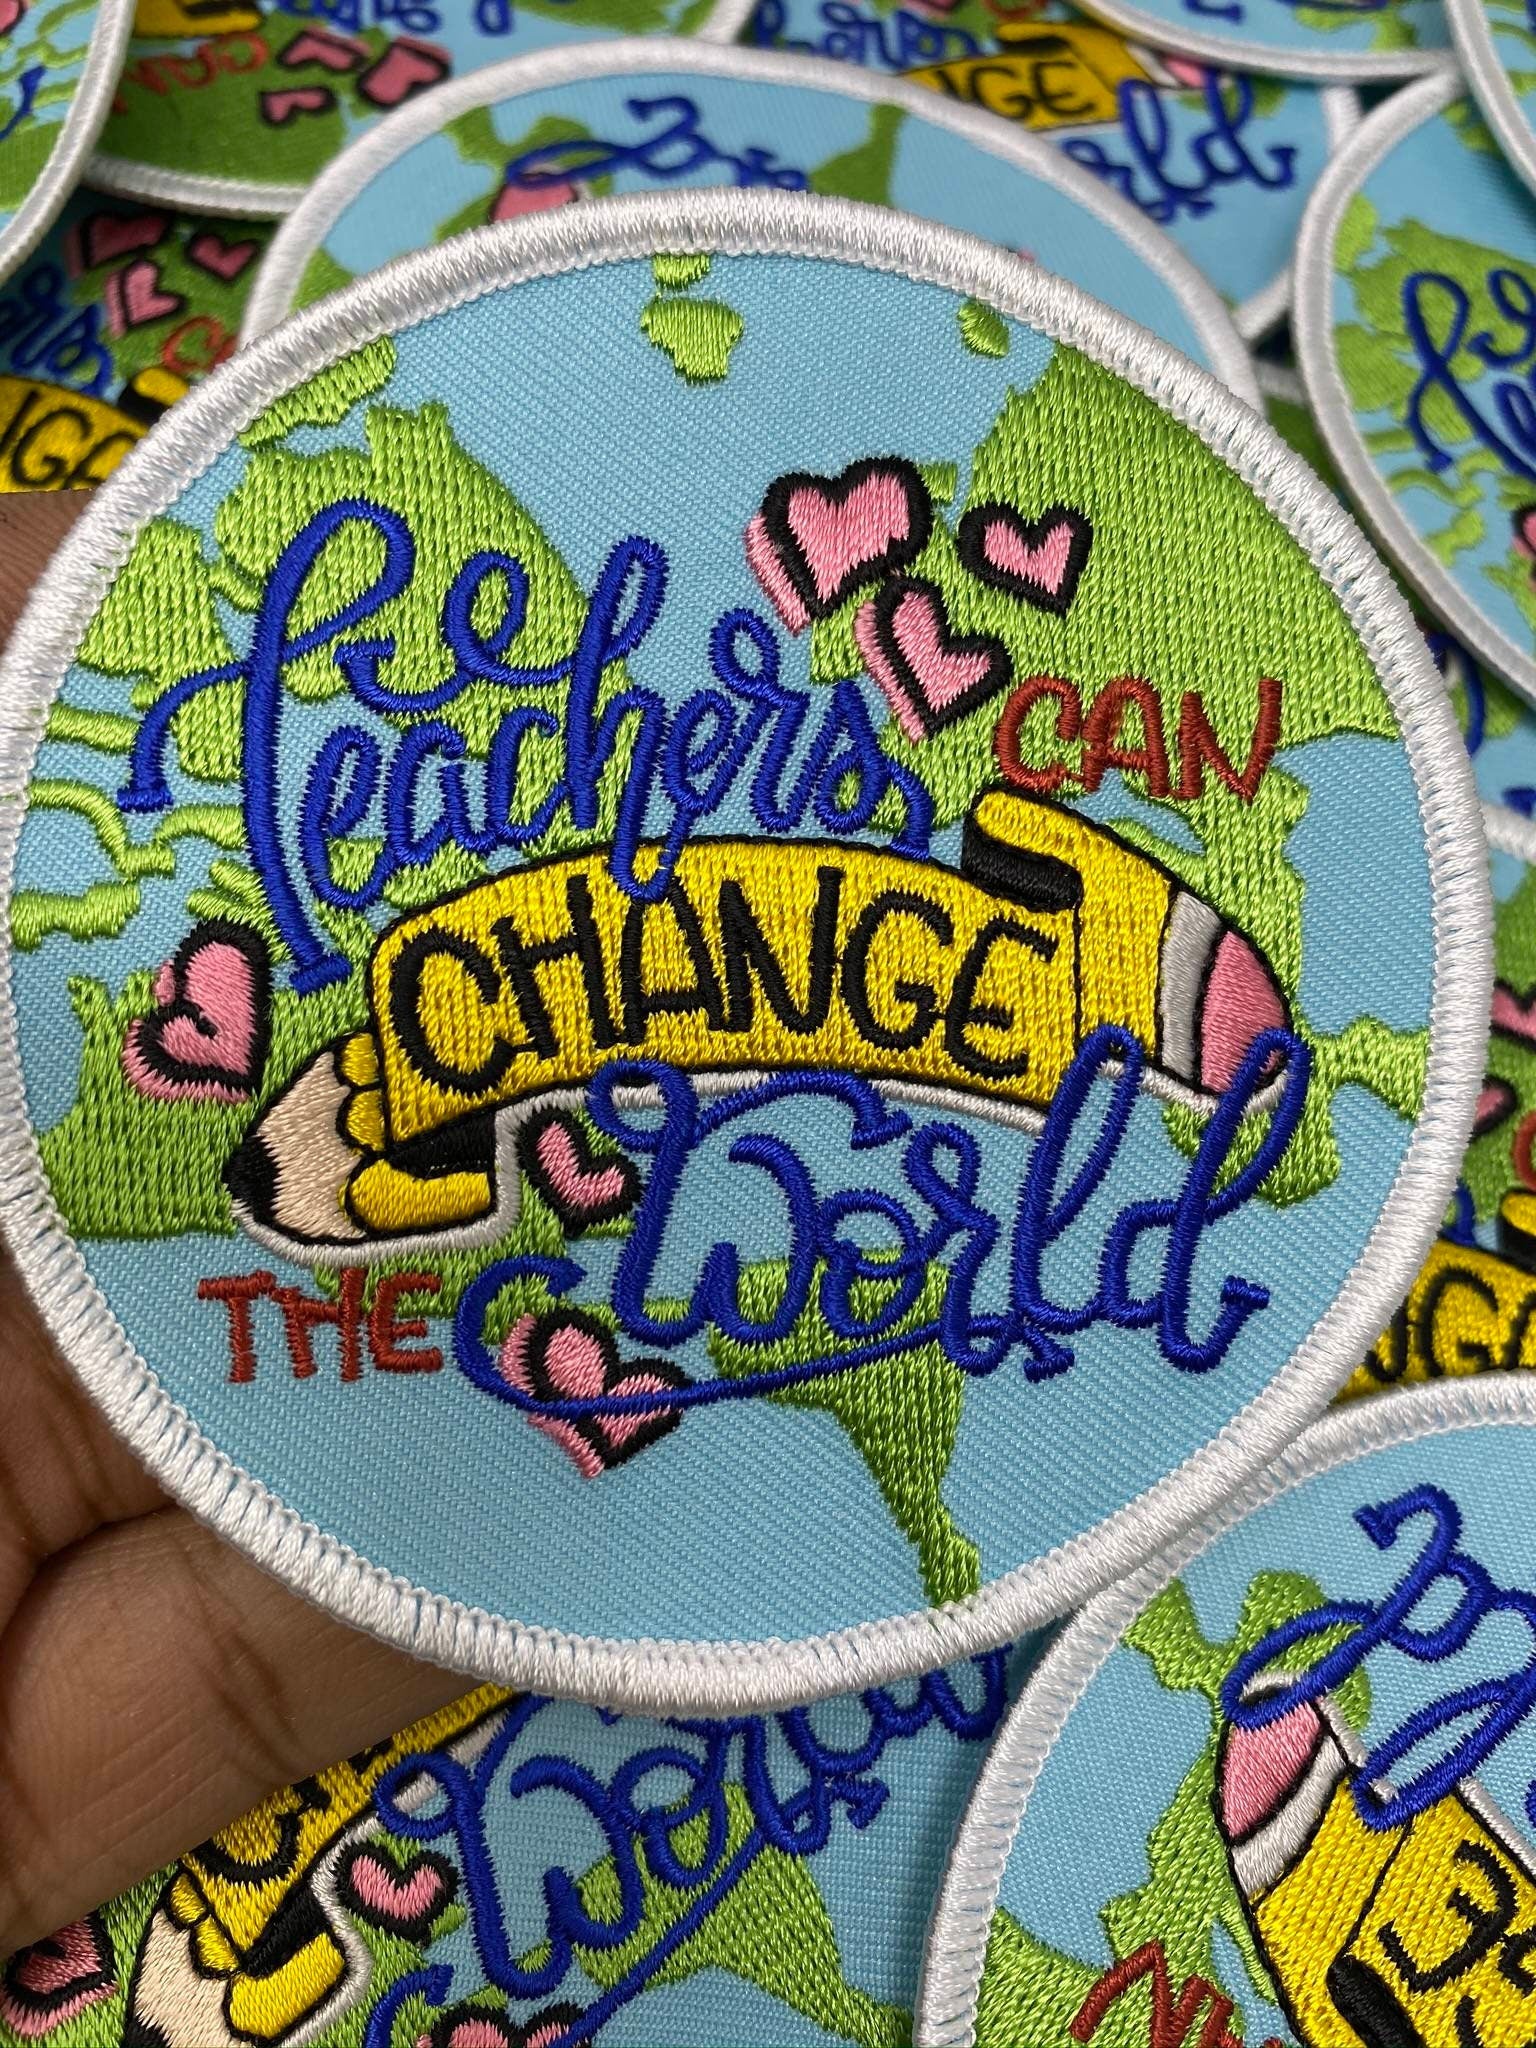 Teacher's Appreciation Gift - Iron-on Embroidery Patch for Teacher's - "Teacher's Can Change the World" Size 3" Circular Applique for Denim